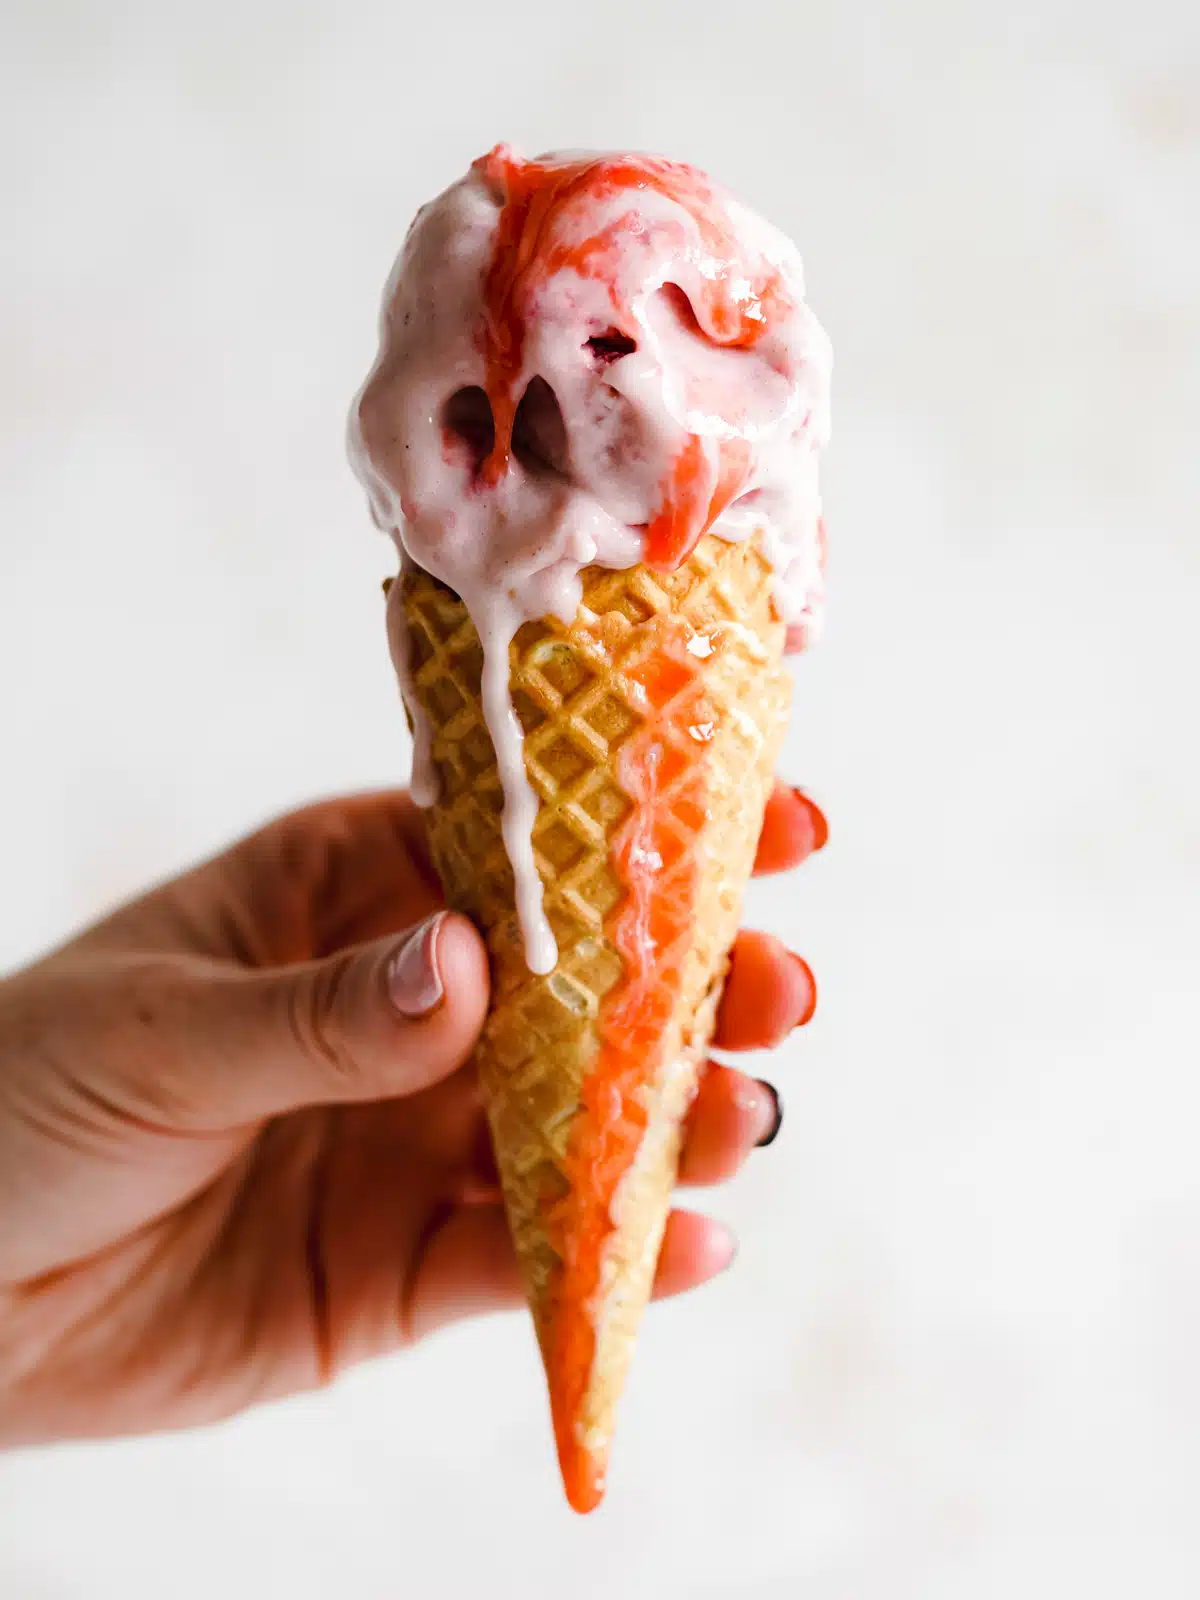 hand holding up a strawberry ice cream cone with strawberry sauce dripping from it.